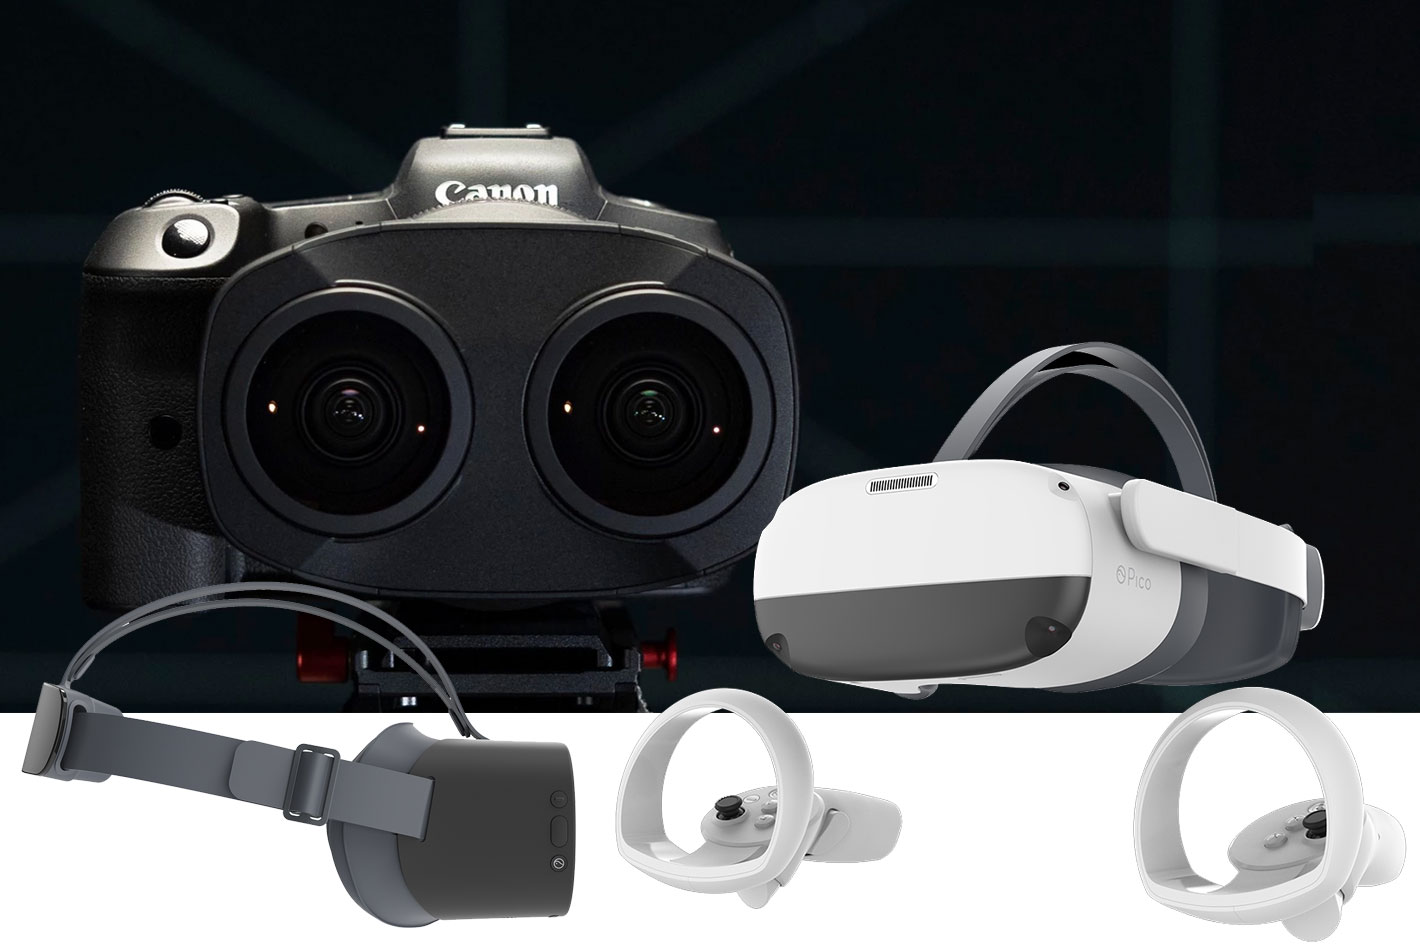 Canon EOS VR System is compatible with Pico VR headsets